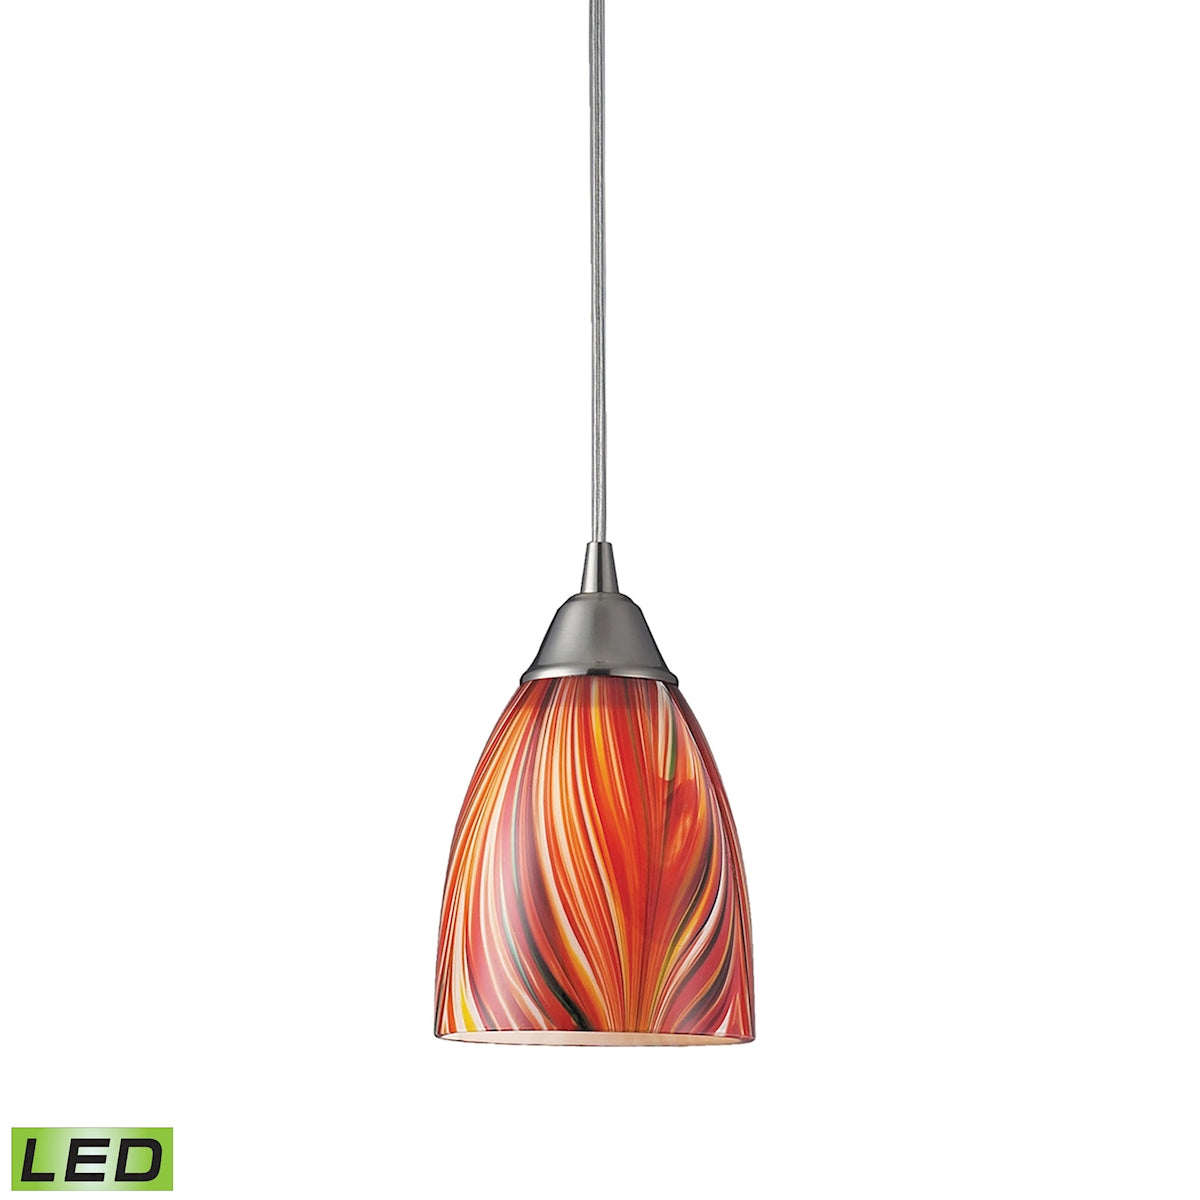 ELK Lighting 416-1M-LED Arco Baleno 1-Light Mini Pendant in Satin Nickel with Multi-colored Glass - Includes LED Bulb